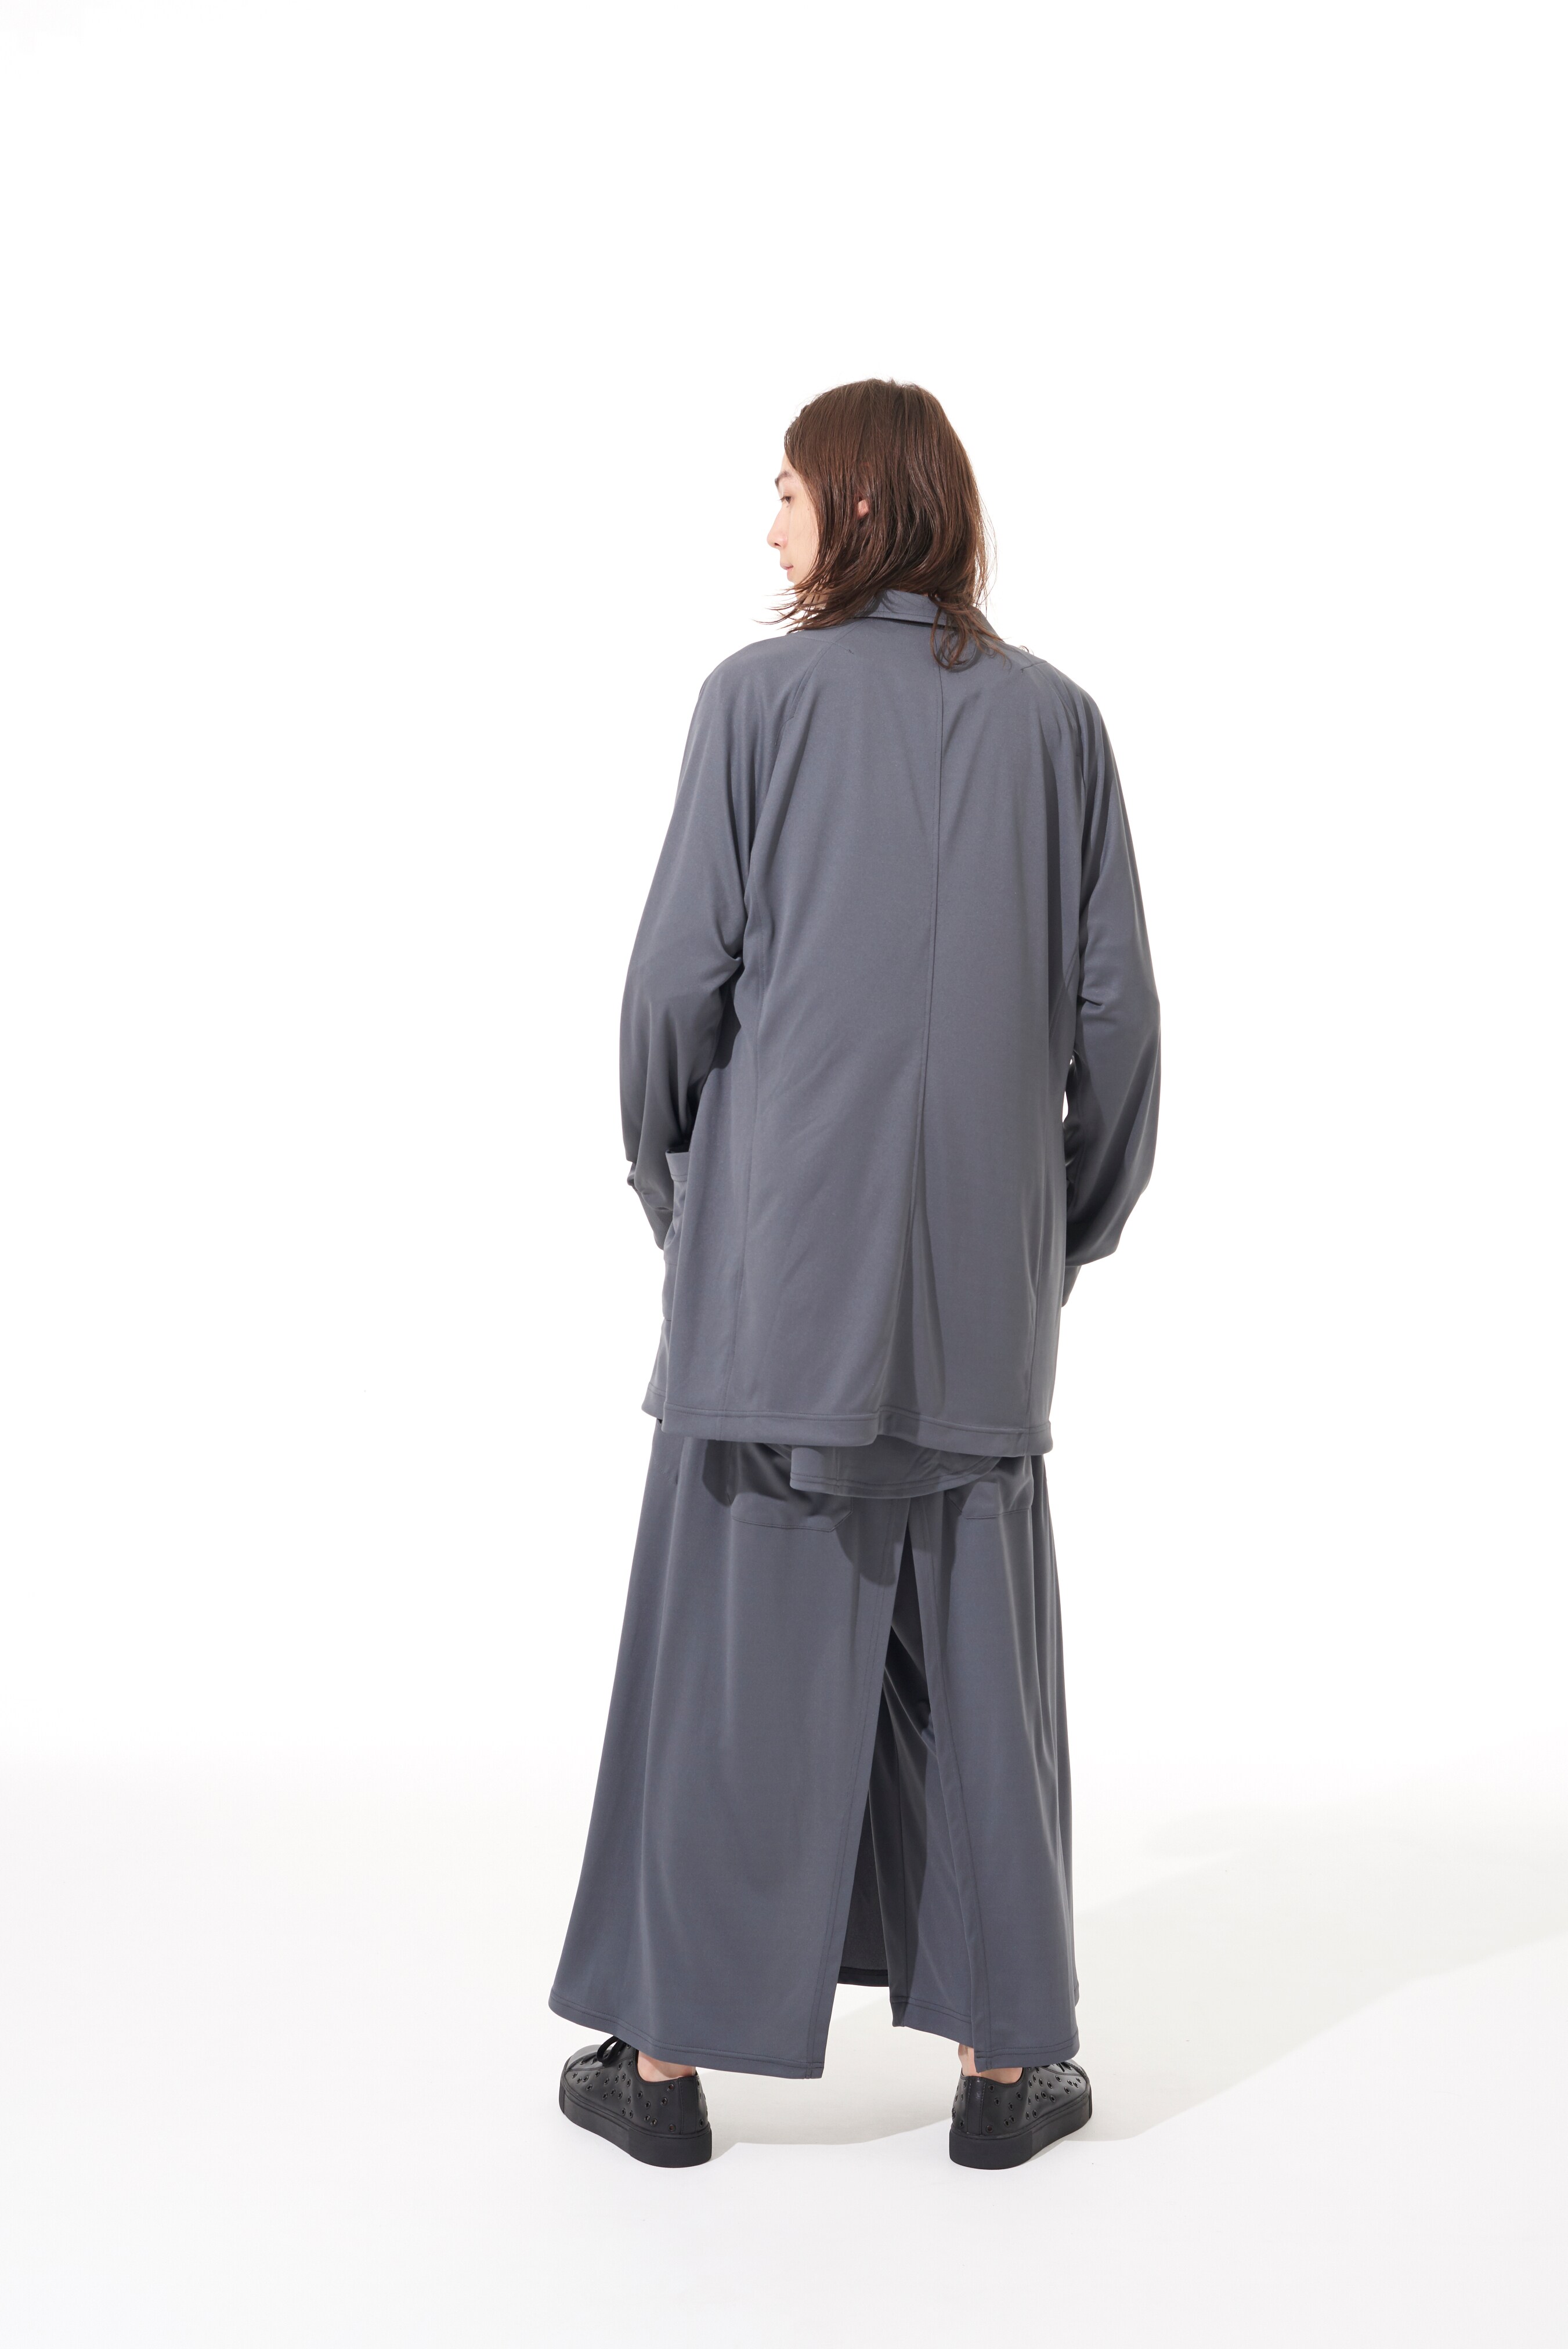 HIGH-GAUGE POLYESTER SMOOTH JERSEY  LAYERED PANTS